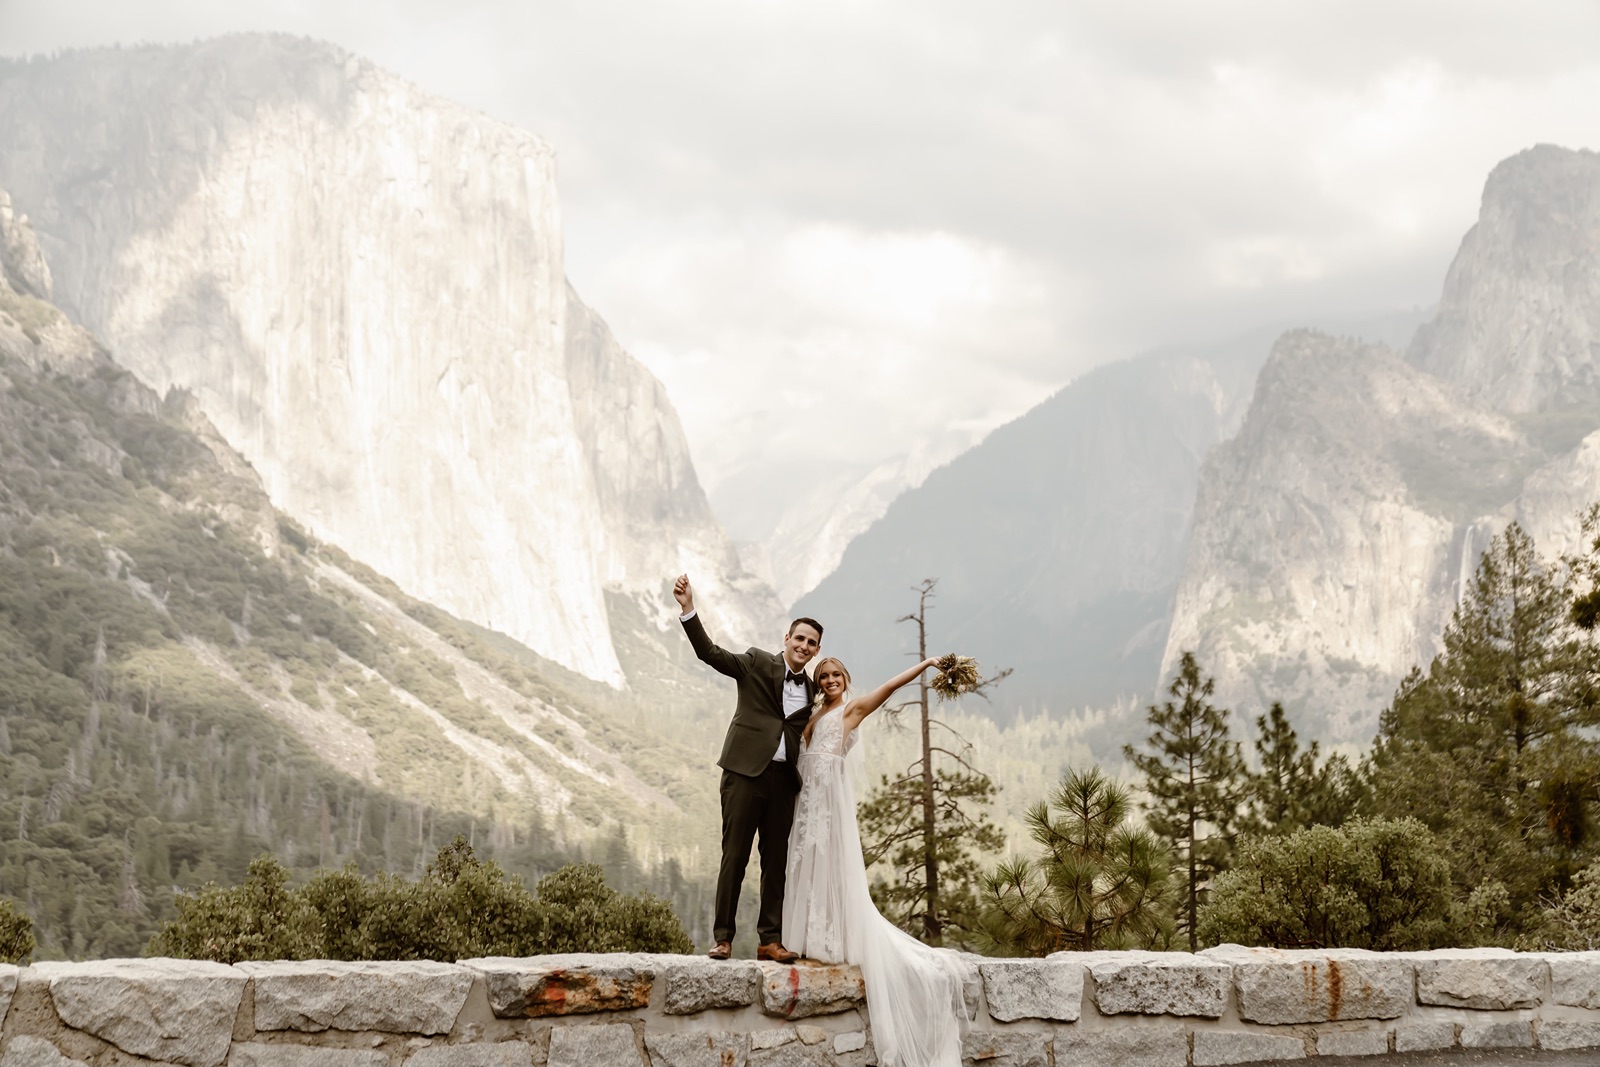 Bride and groom pose with arms in the air at their Yosemite wedding